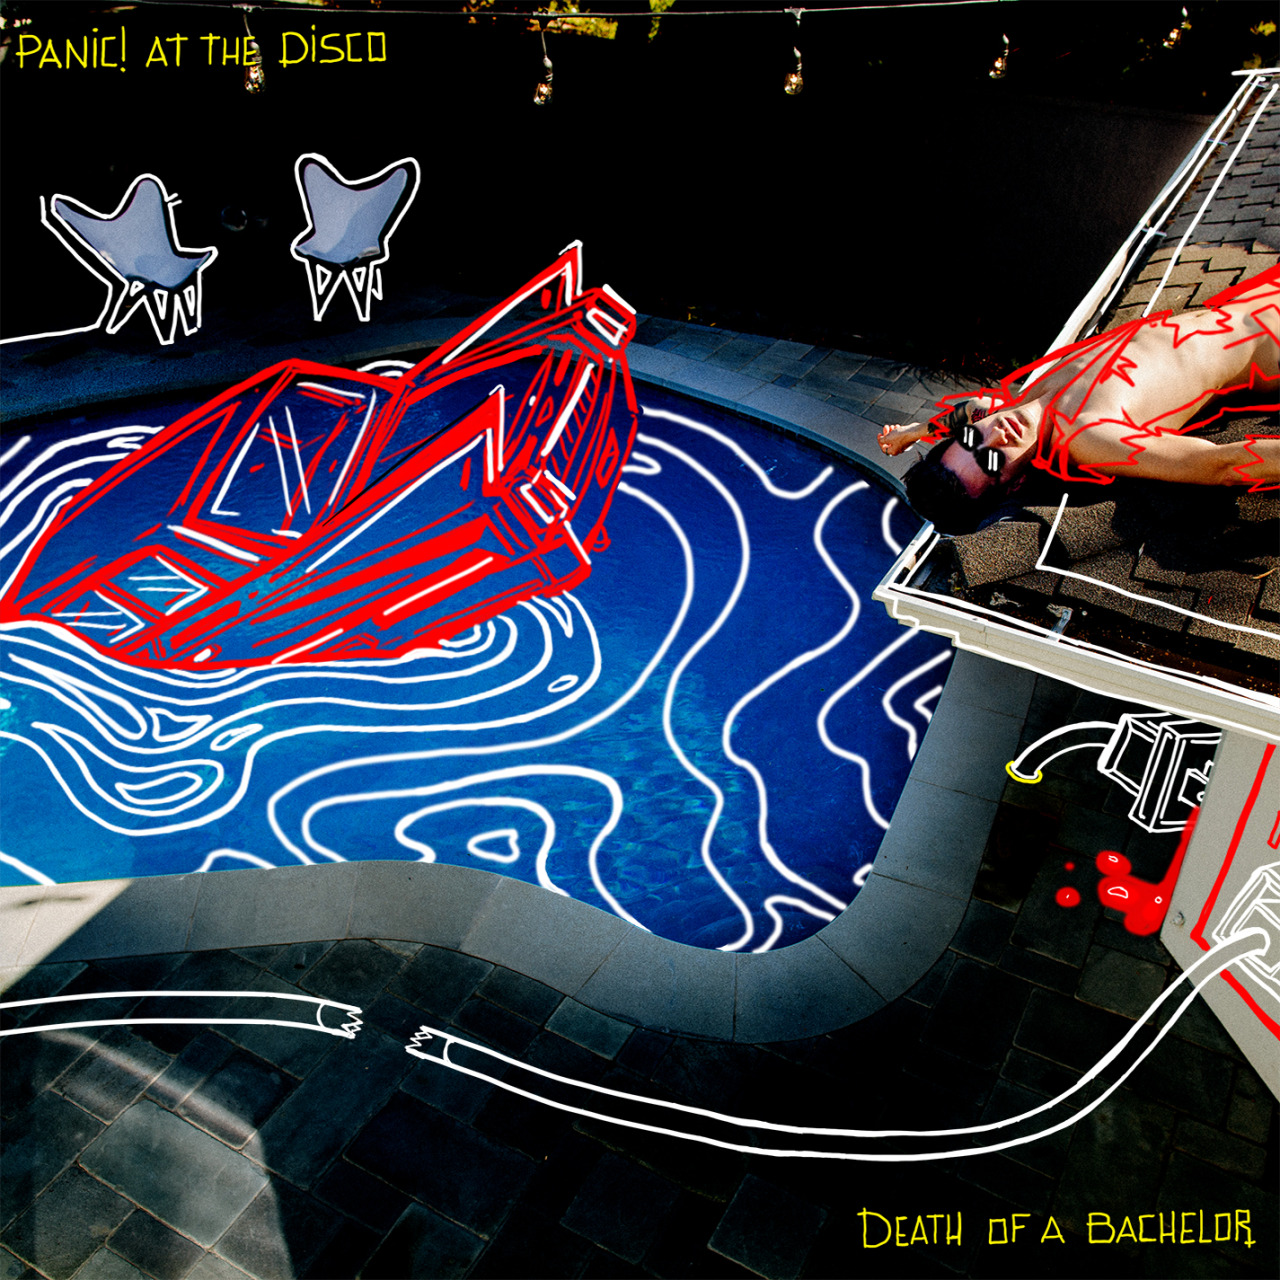 PANIC! AT THE DISCO ANNOUNCE NEW ALBUM, ‘DEATH OF A BACHELOR’ ON JAN 15th 2016